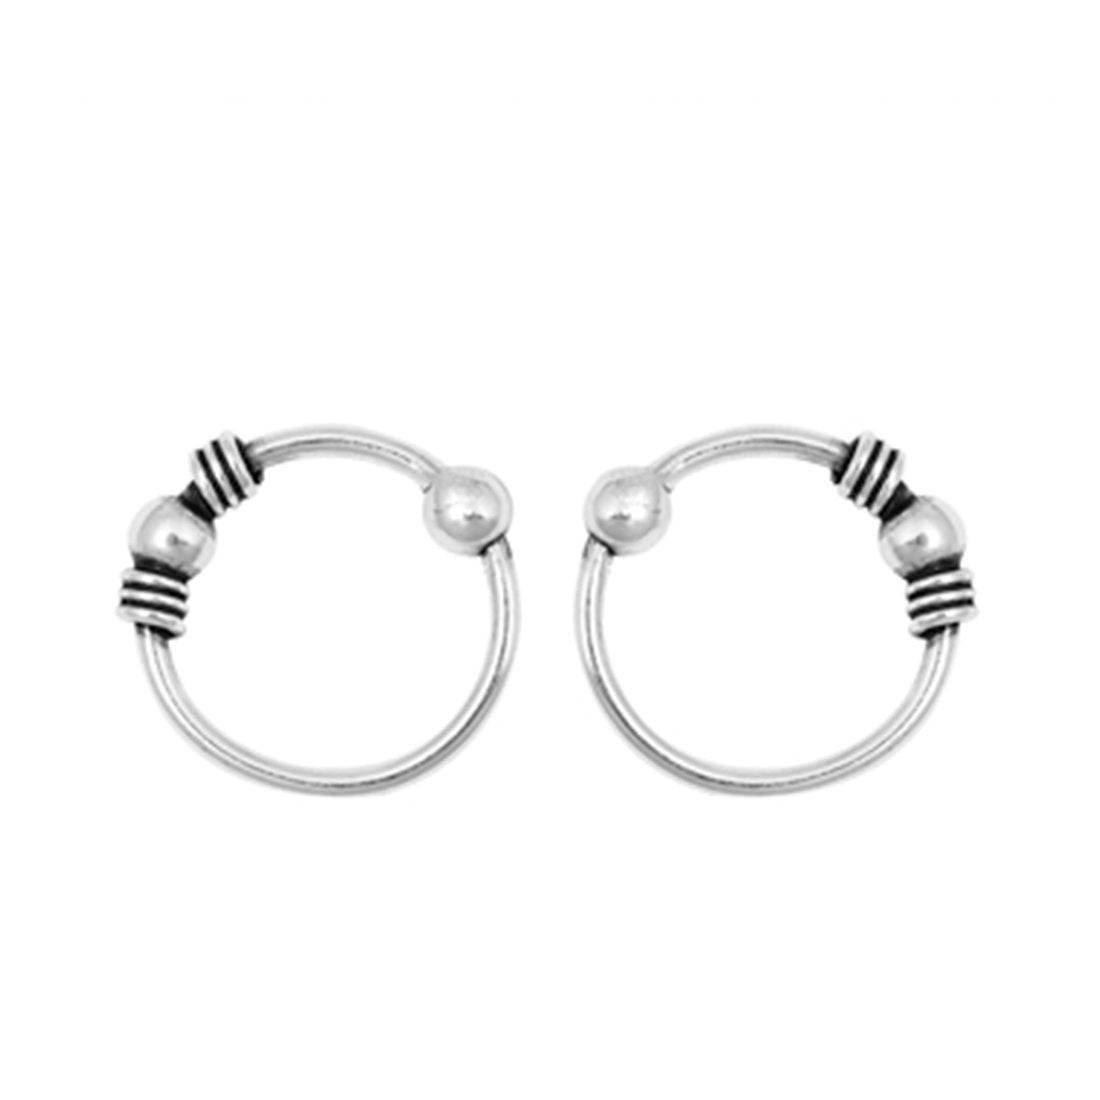 Silver Round Bali Nose Stud Ring 925 Sterling Silver-8mm